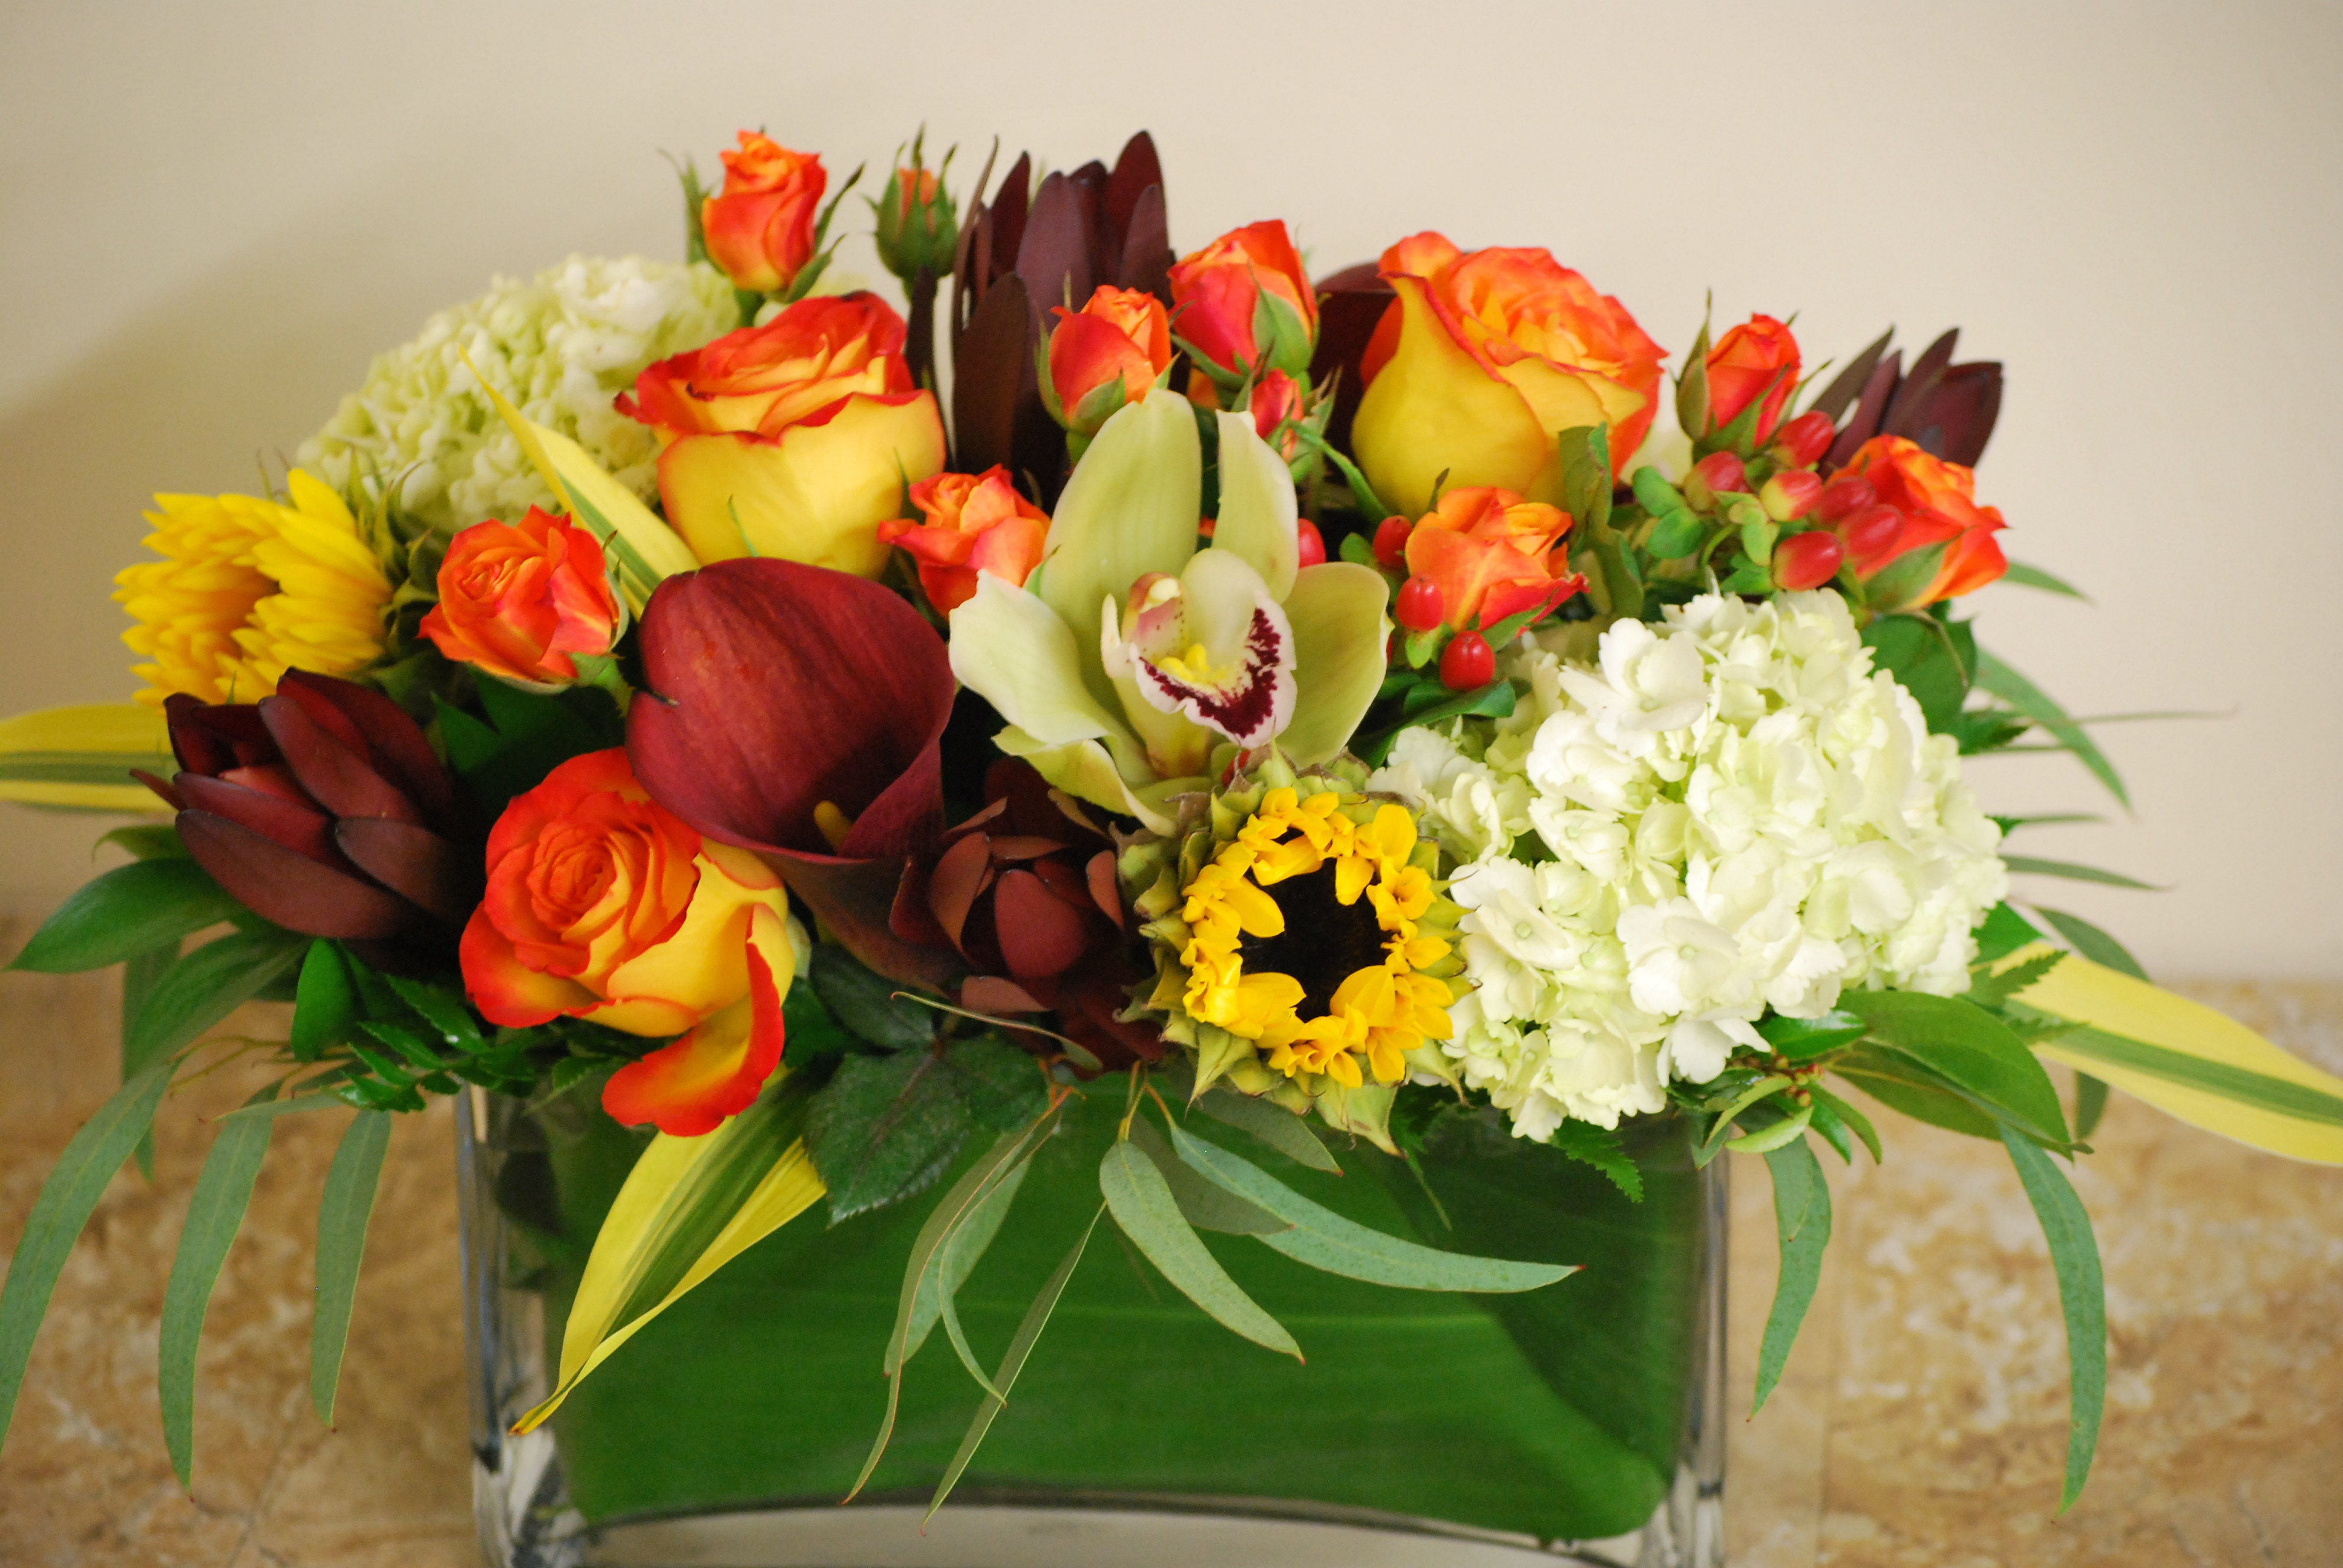 Thanksgiving Flower Centerpieces
 Holiday traditions